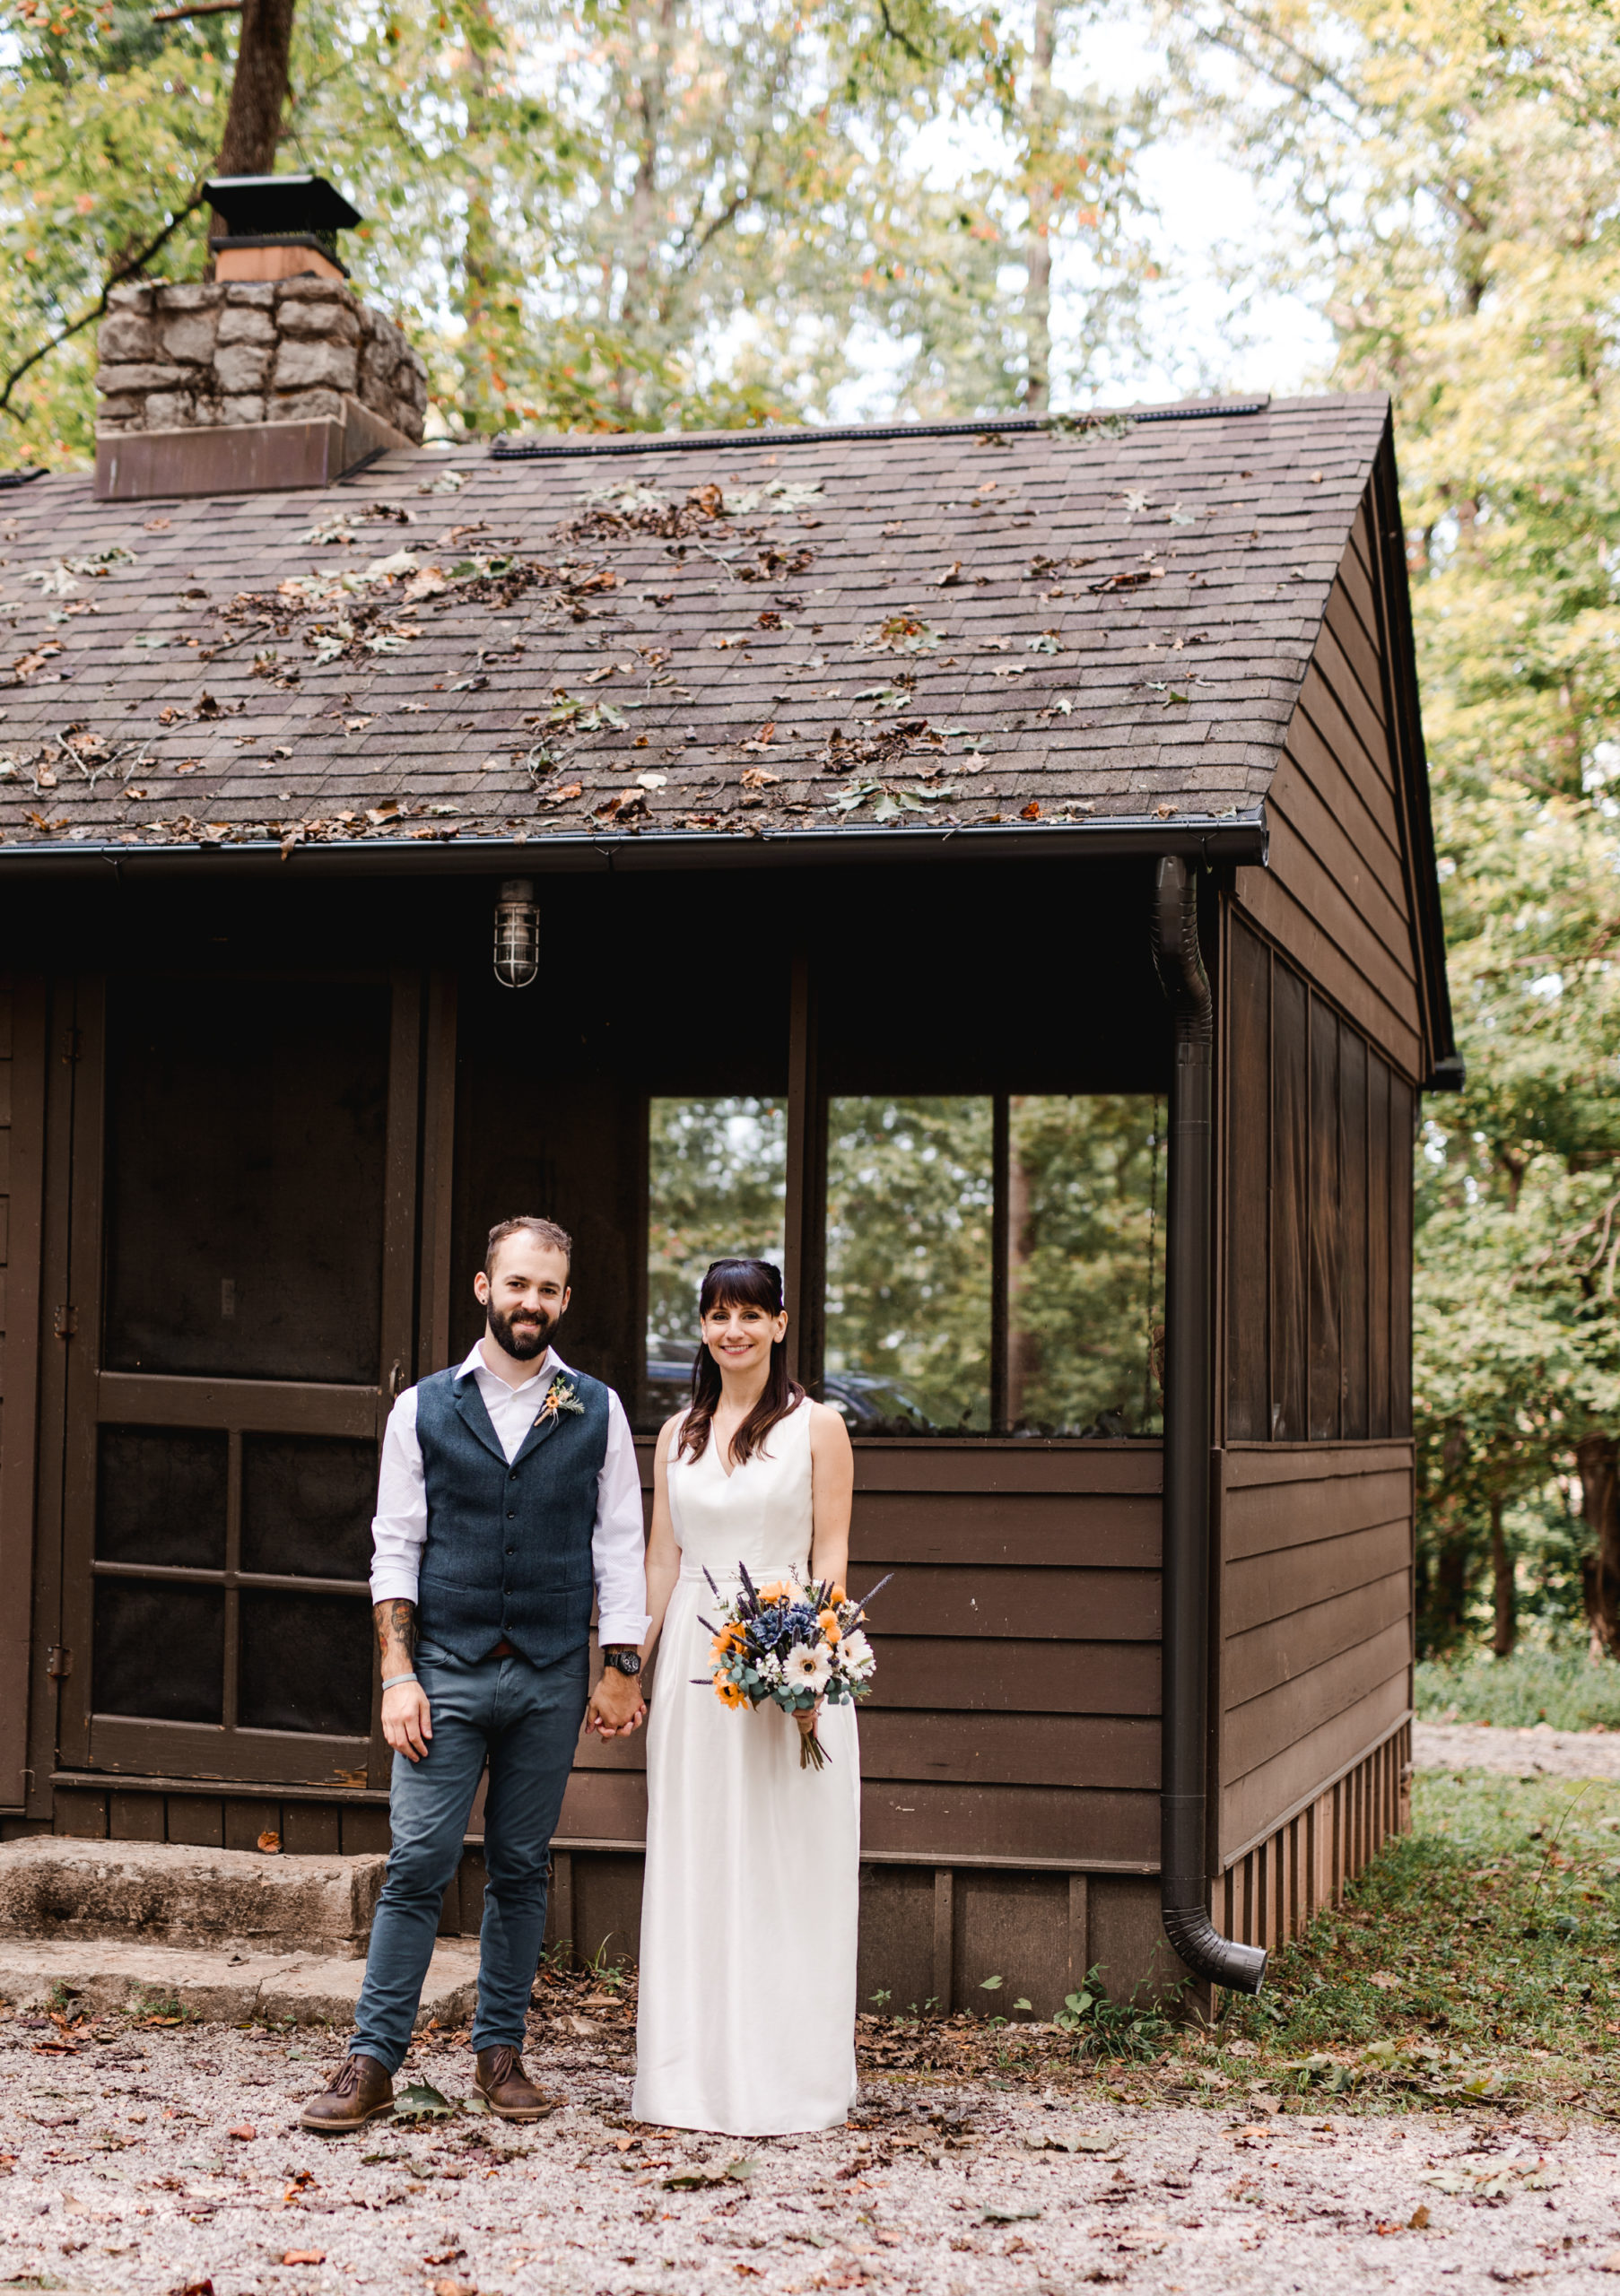 Our Wedding at a Tennessee State Park | The Nutrition Adventure